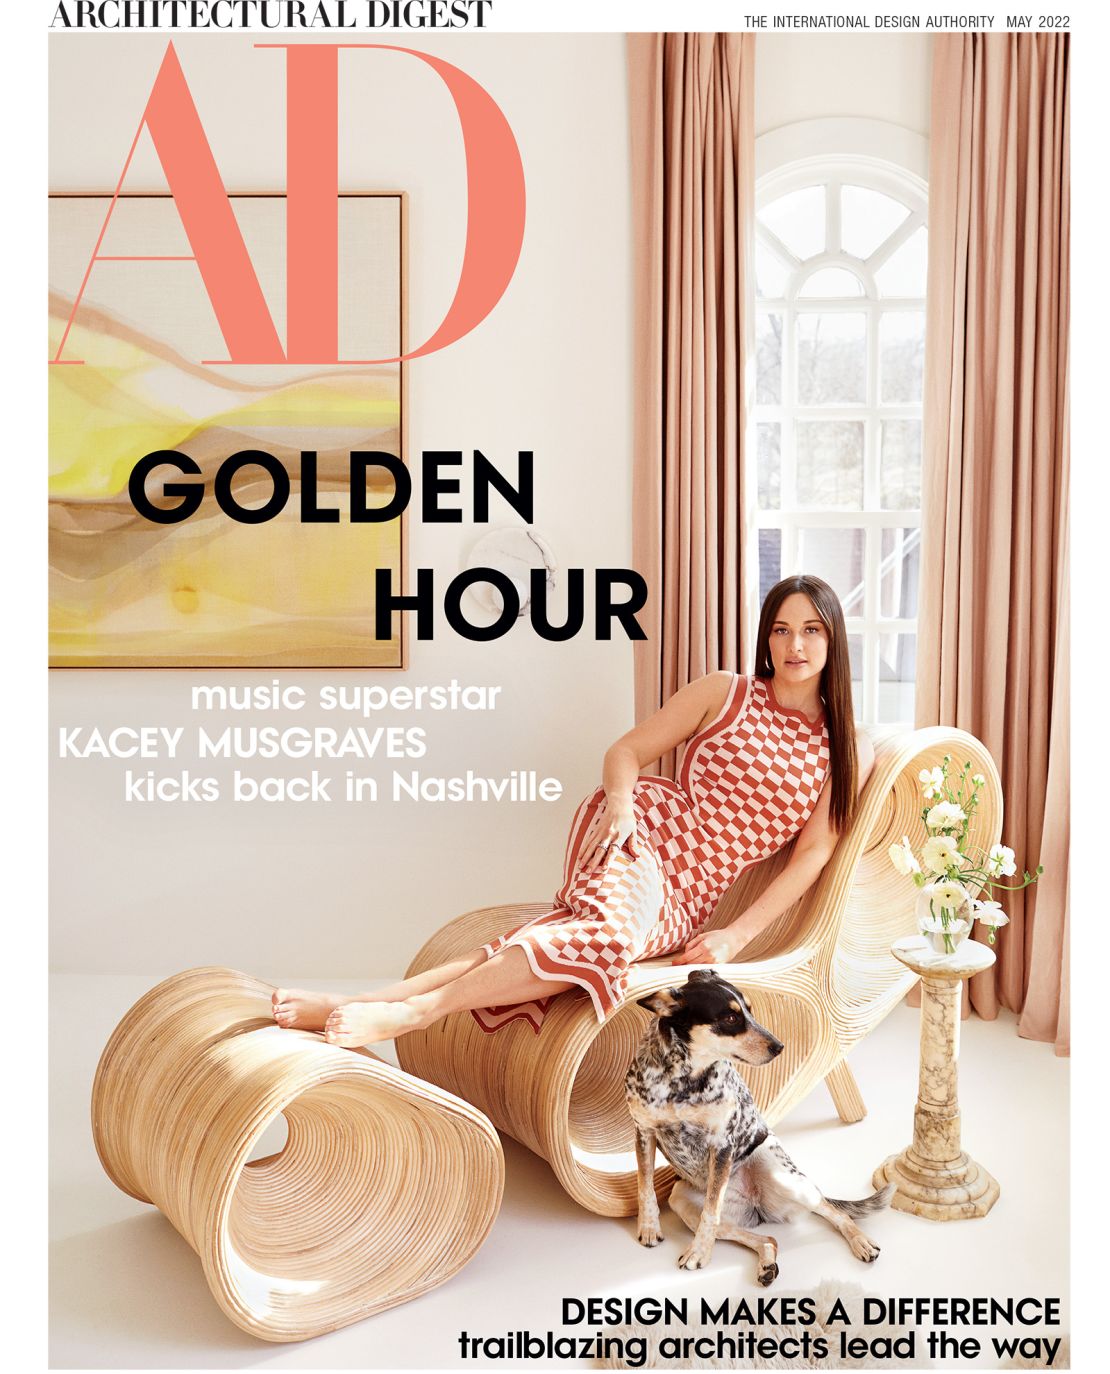 Kacey Musgraves on the cover of Architectural Digest's May cover. 